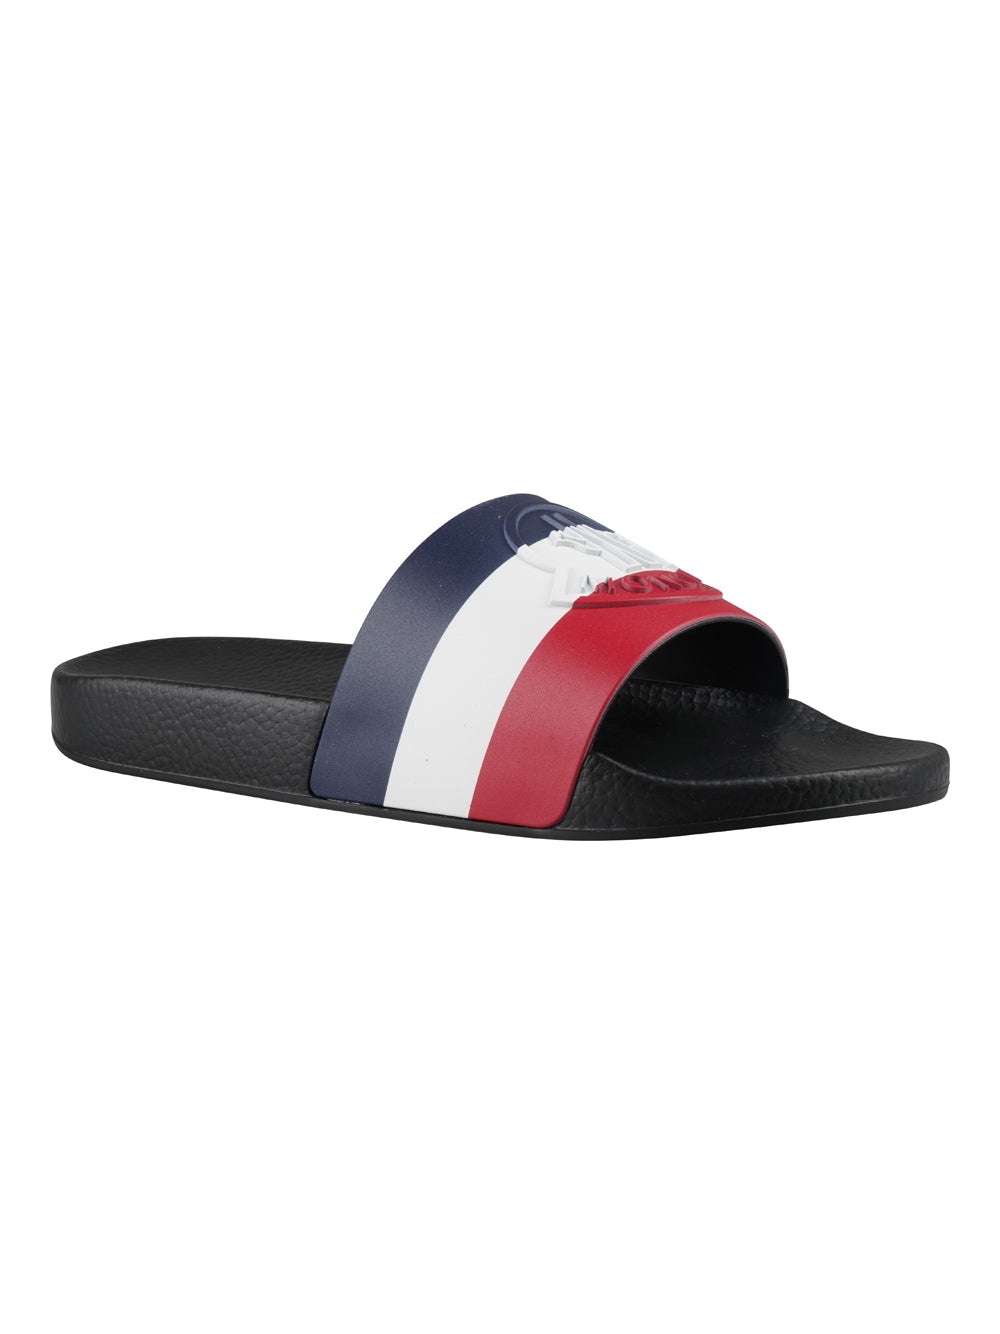 MONCLER MULTICOLOR SLIPPERS - 6